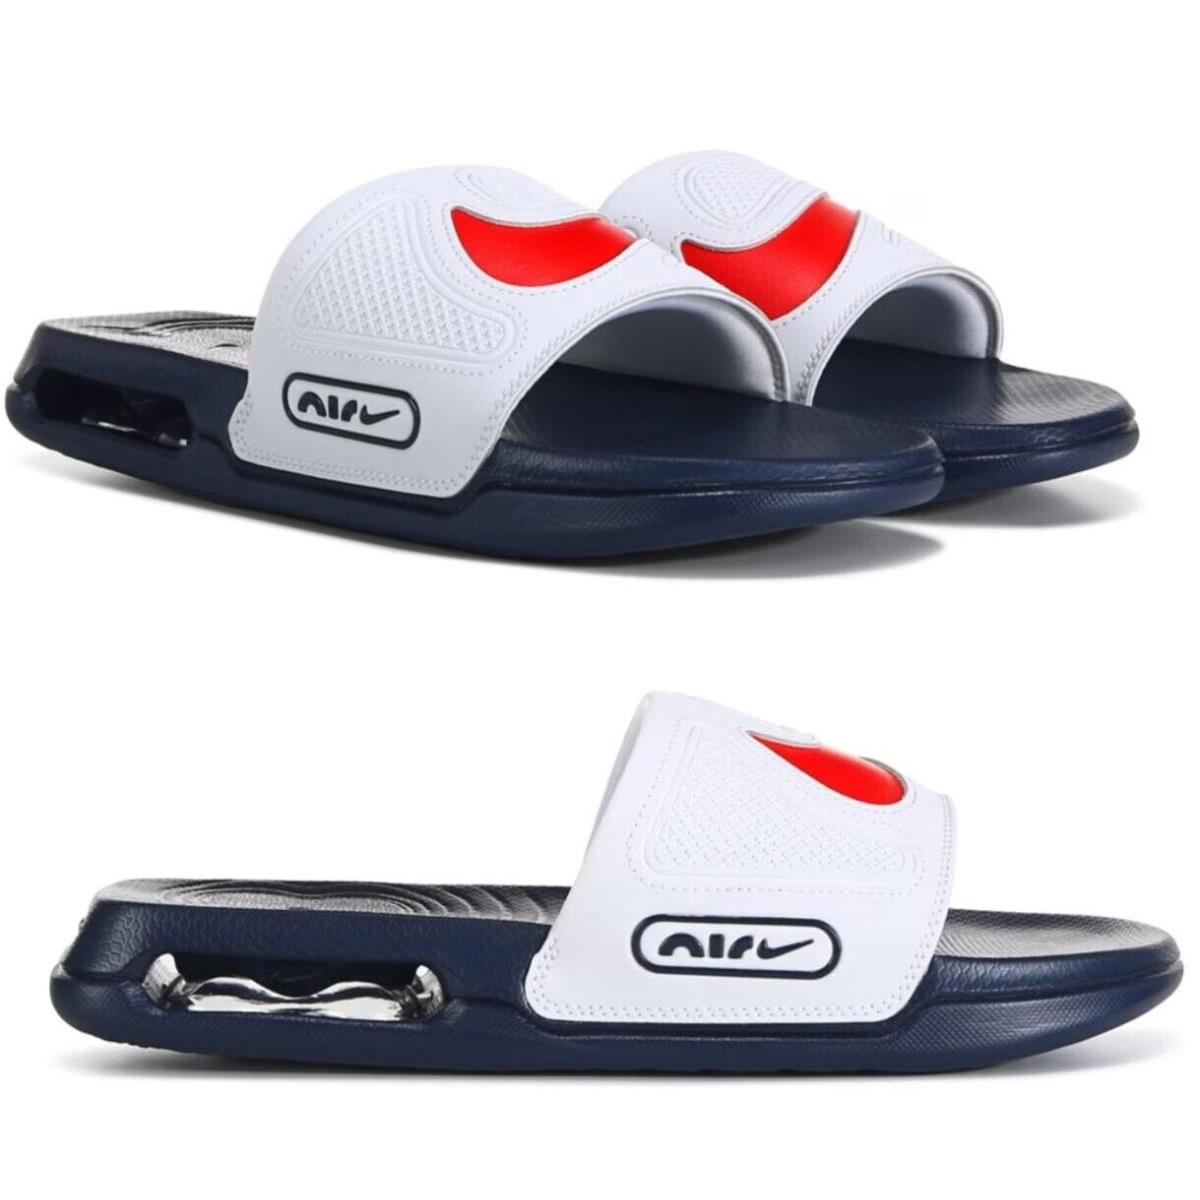 Nike Air Max Cirro Slide Sandals Athletic Mens lt Gray Navy Red All Sizes - Gray